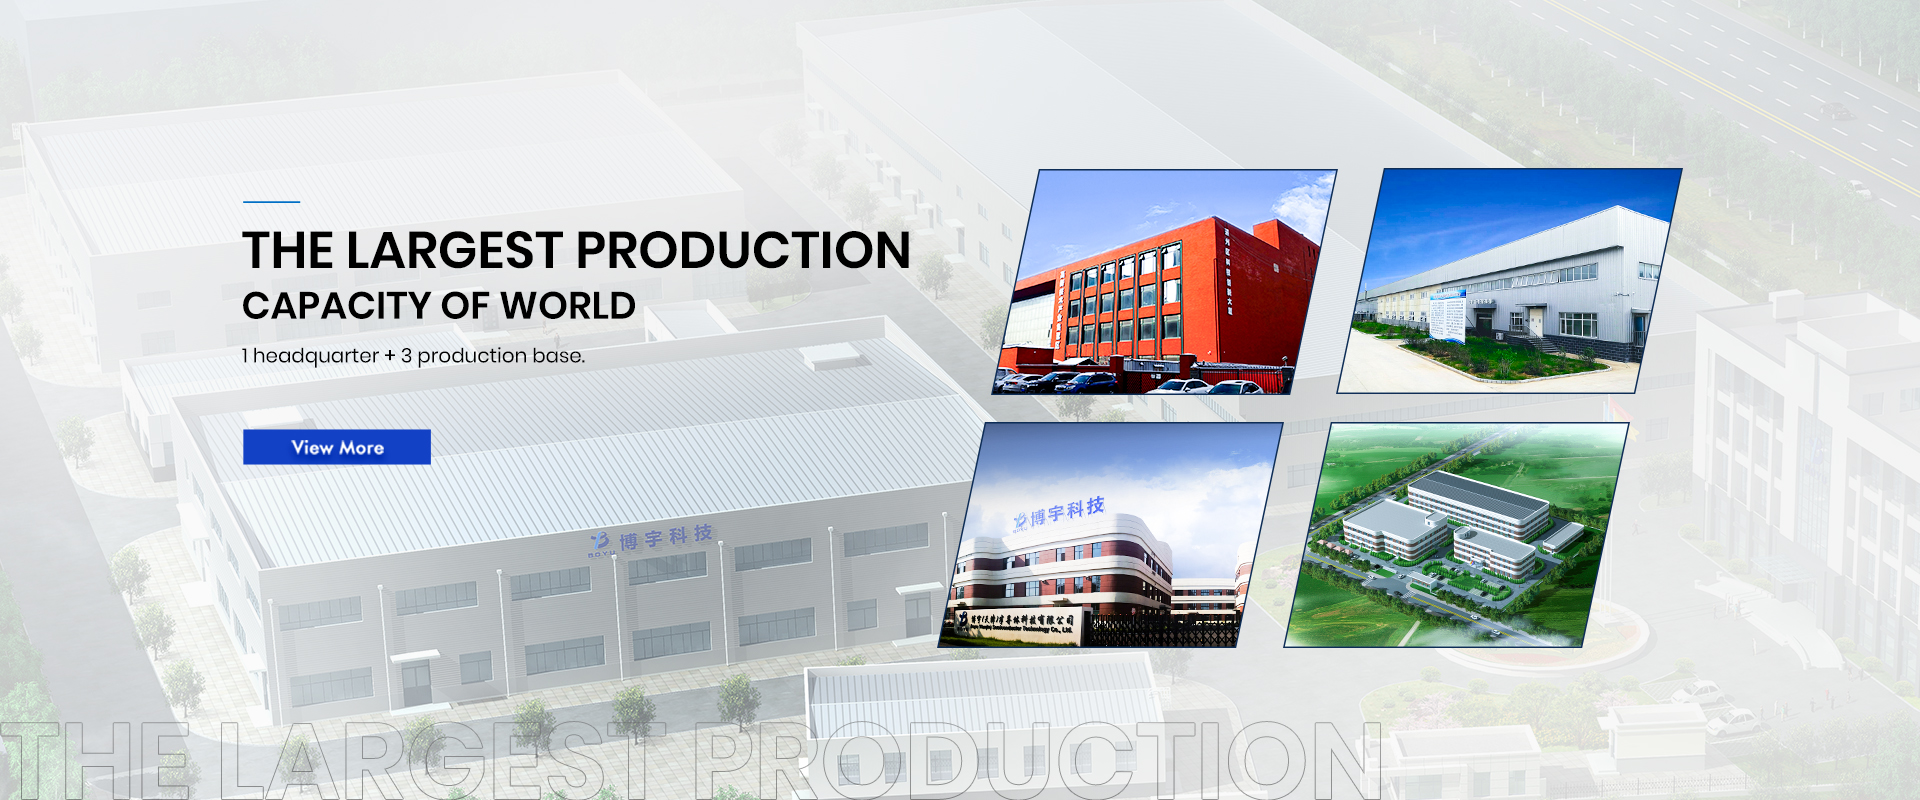 THE LARGEST PRODUCTION CAPACITY OF WORLD